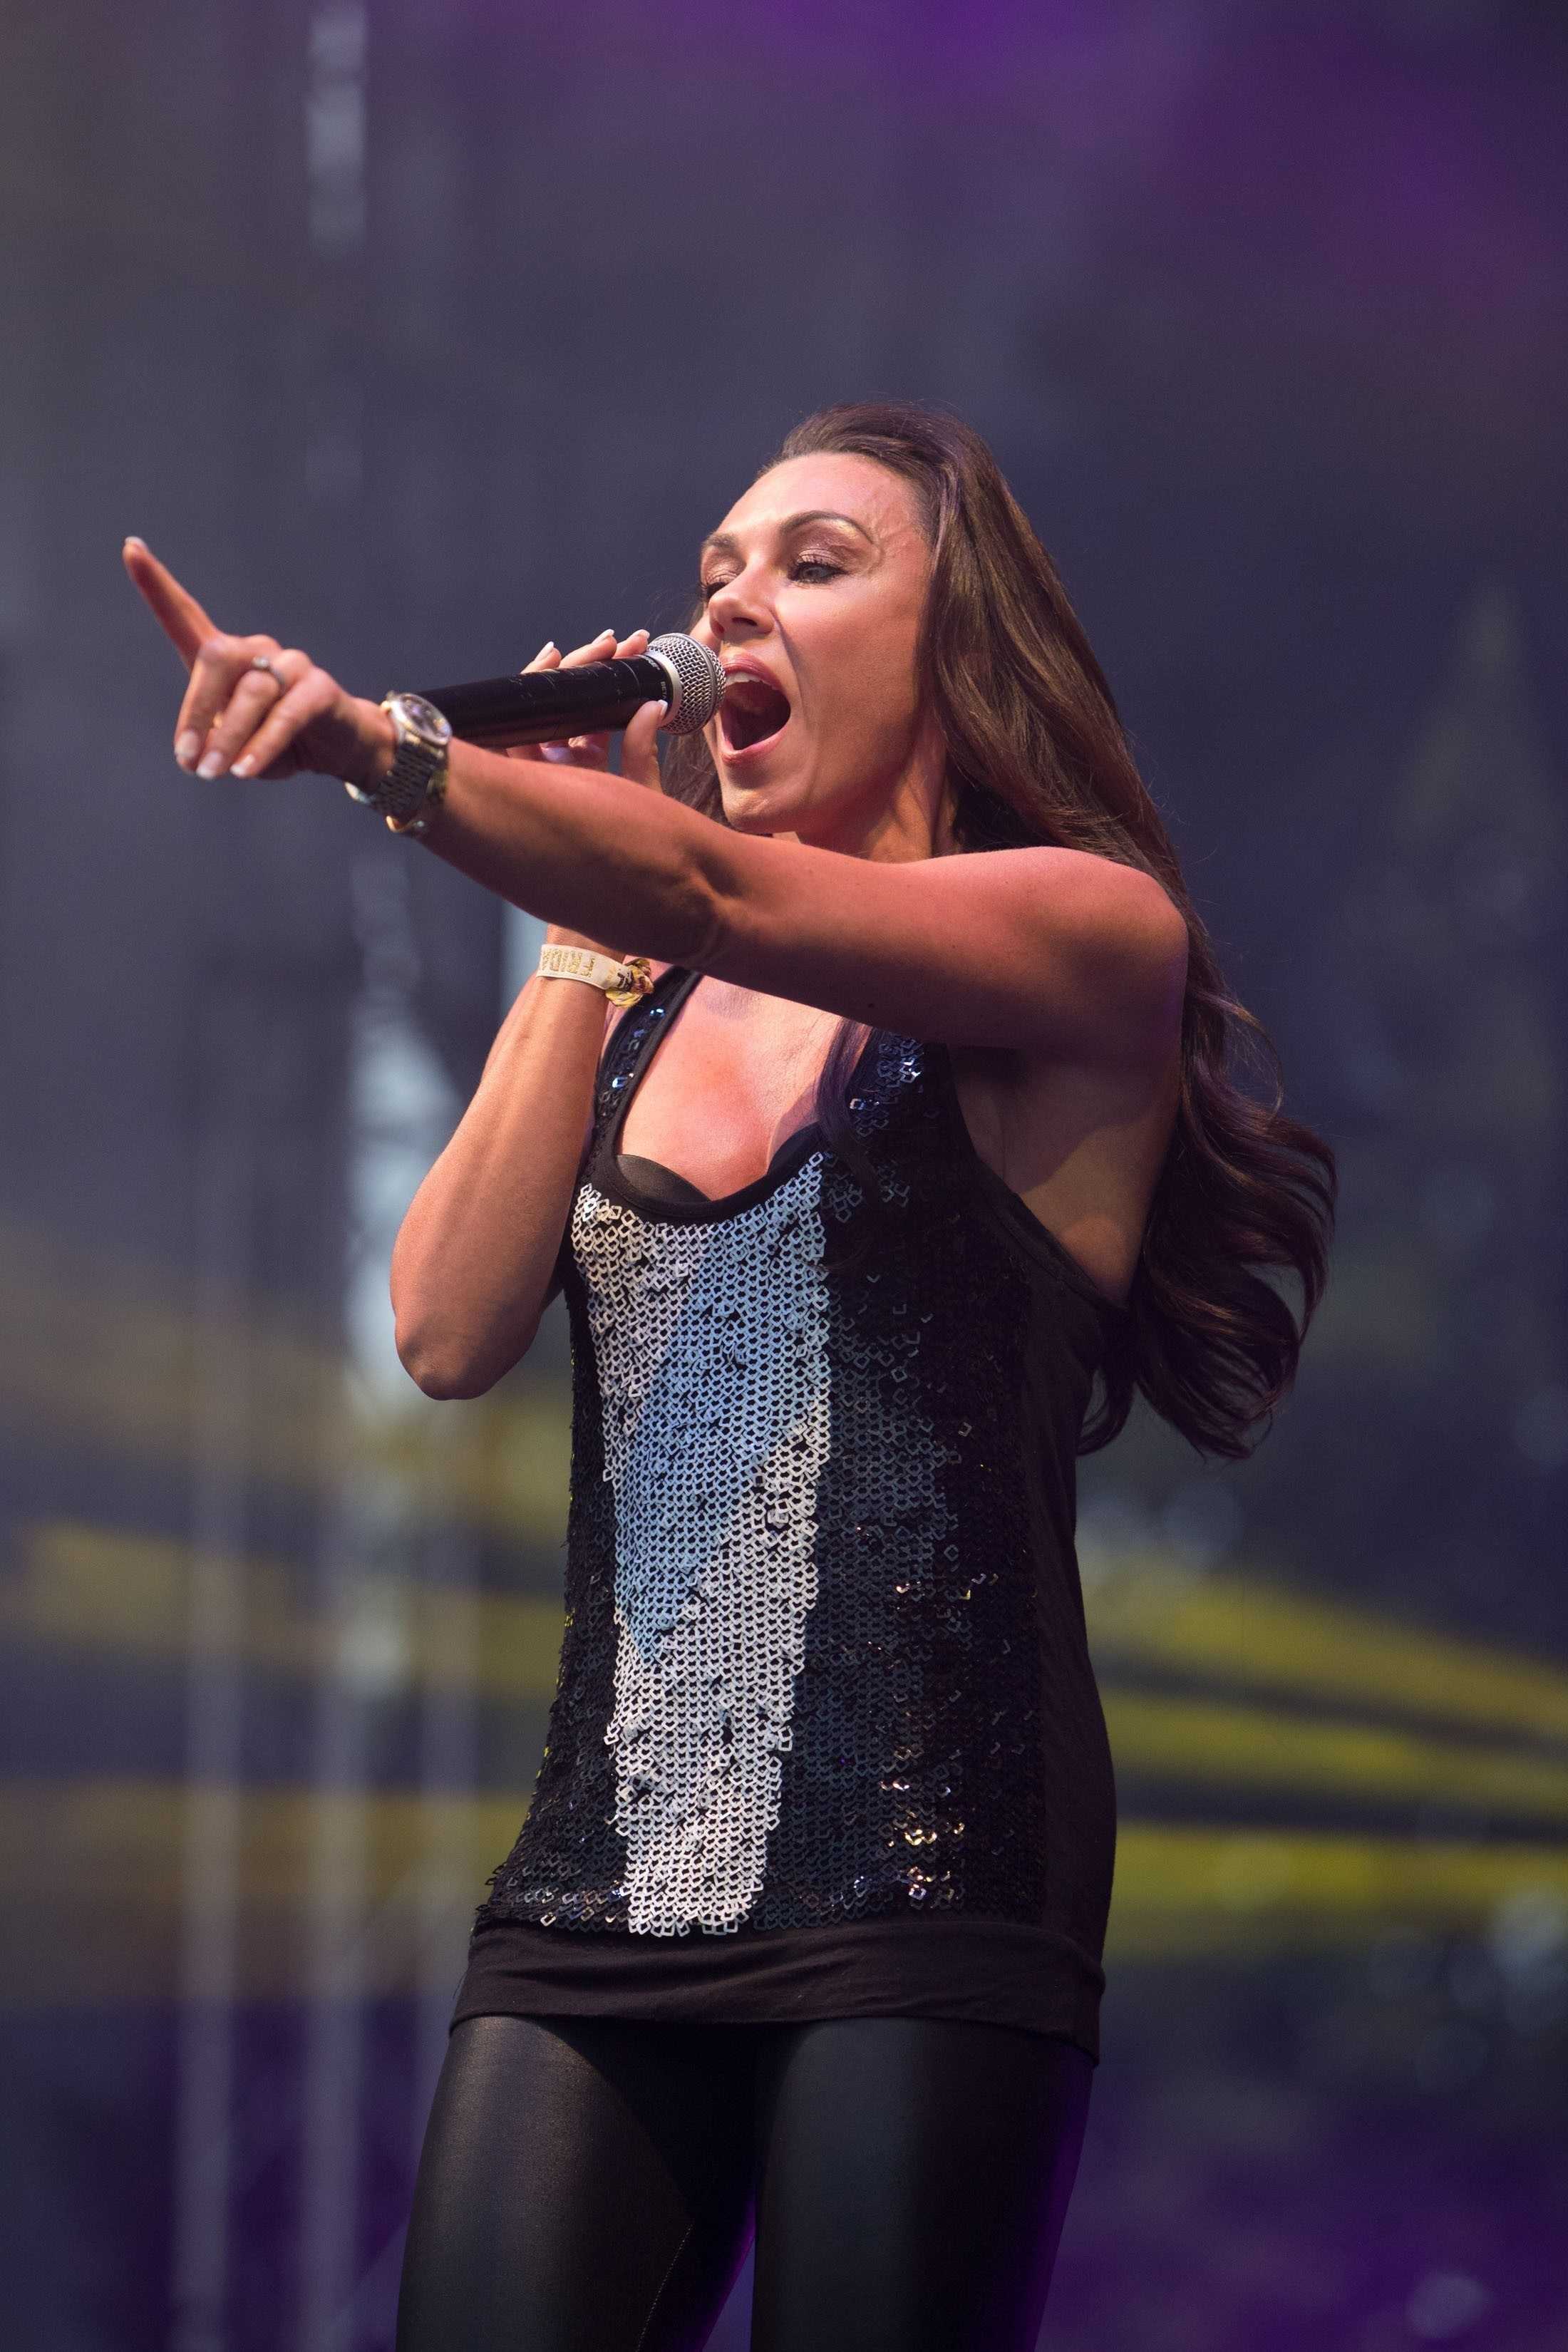 Michelle Heaton performs at the Big Day Out Festival